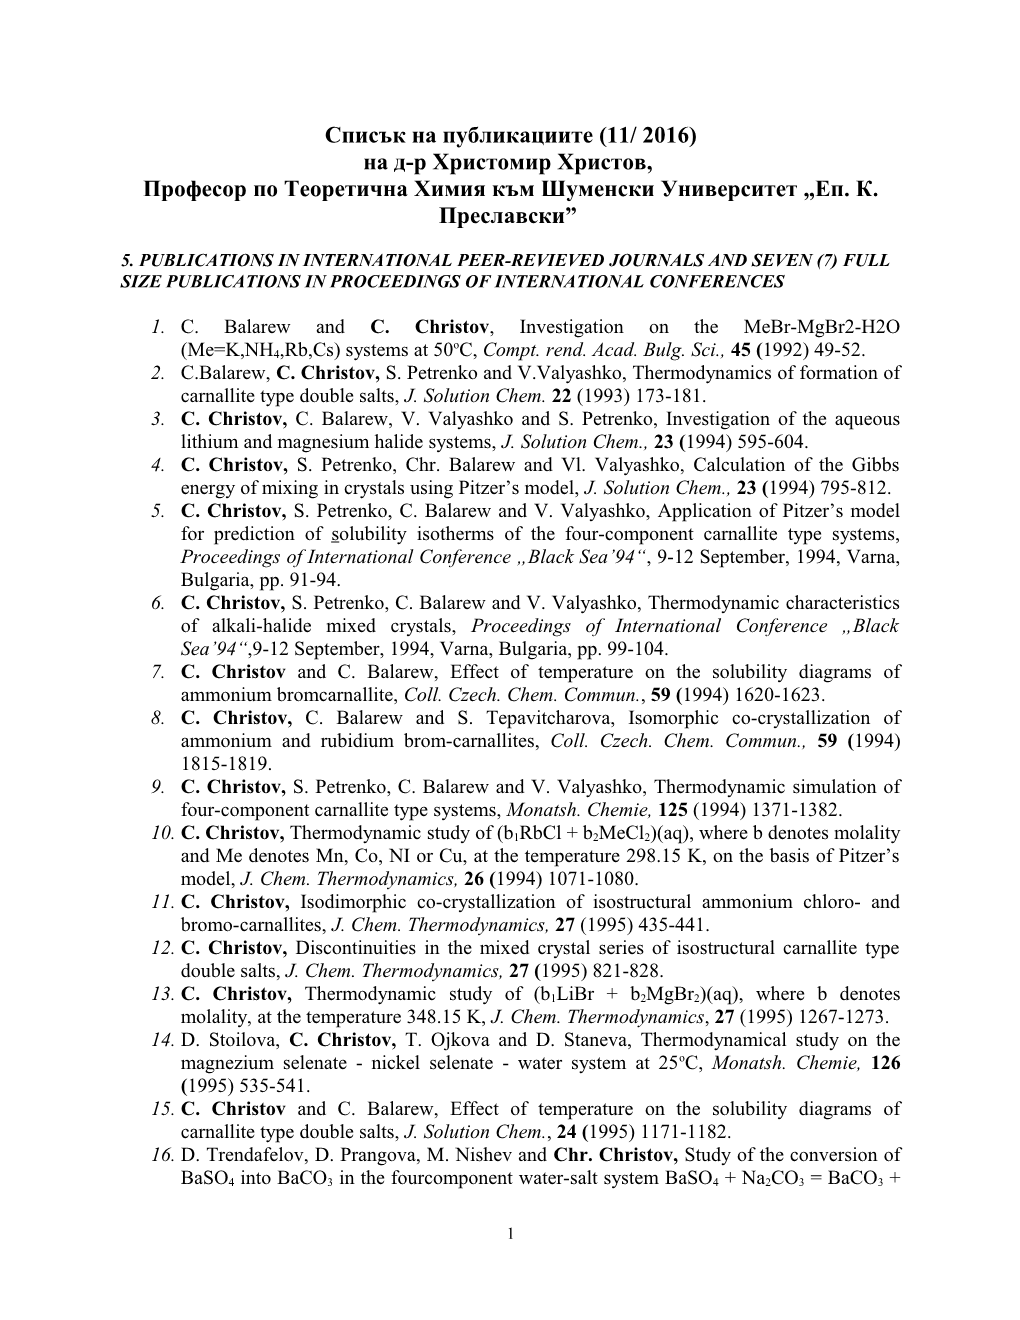 List of Publications of Dr